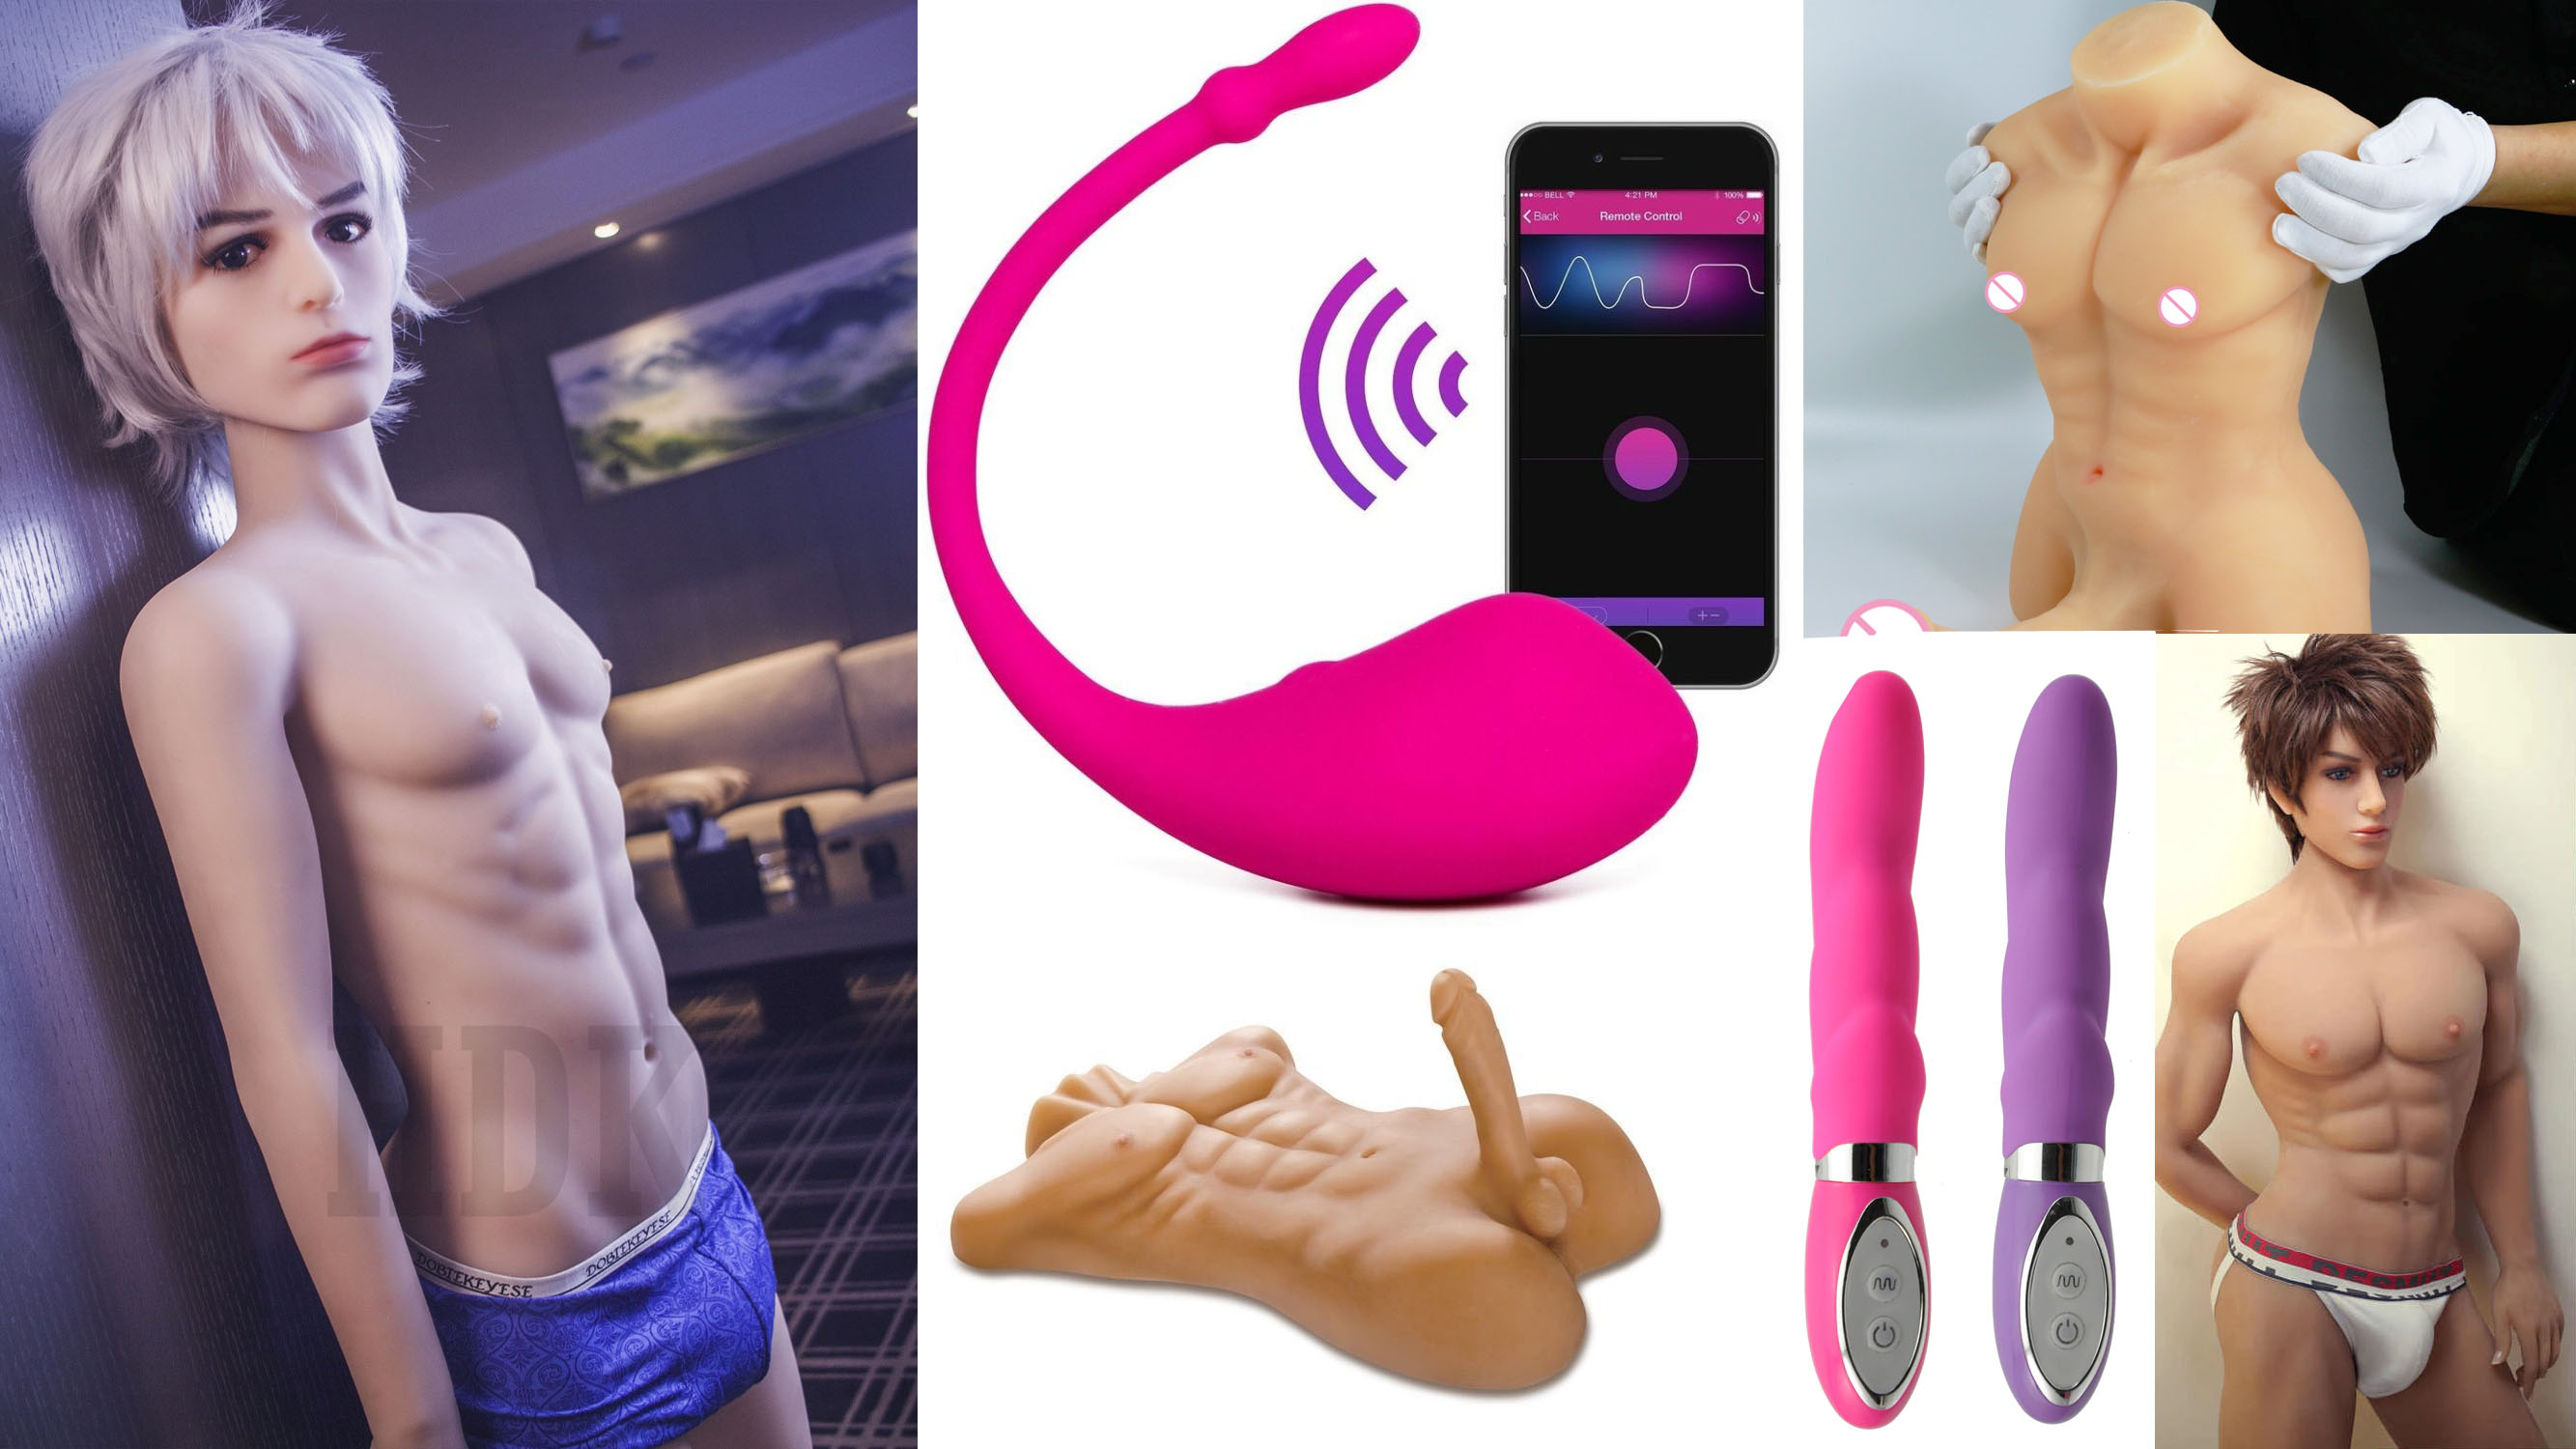 Hot SexToys and Vibrators Gadgets for Girls